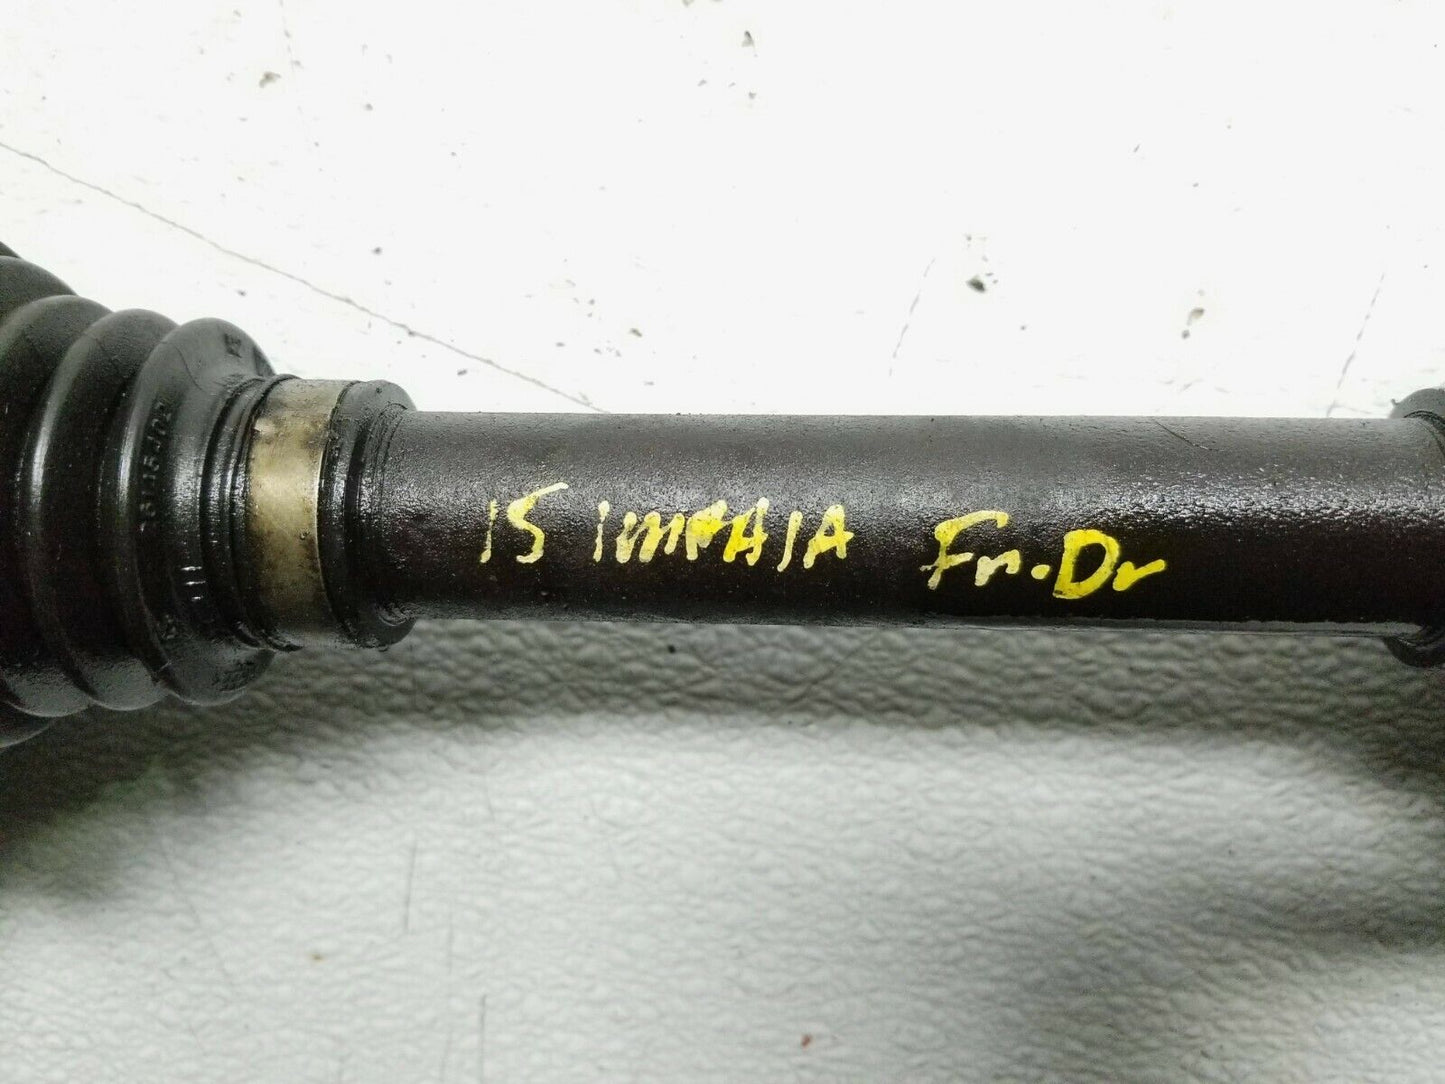 15 16 17 18 Chevy Impala Front Left Driver Axle Shaft OEM